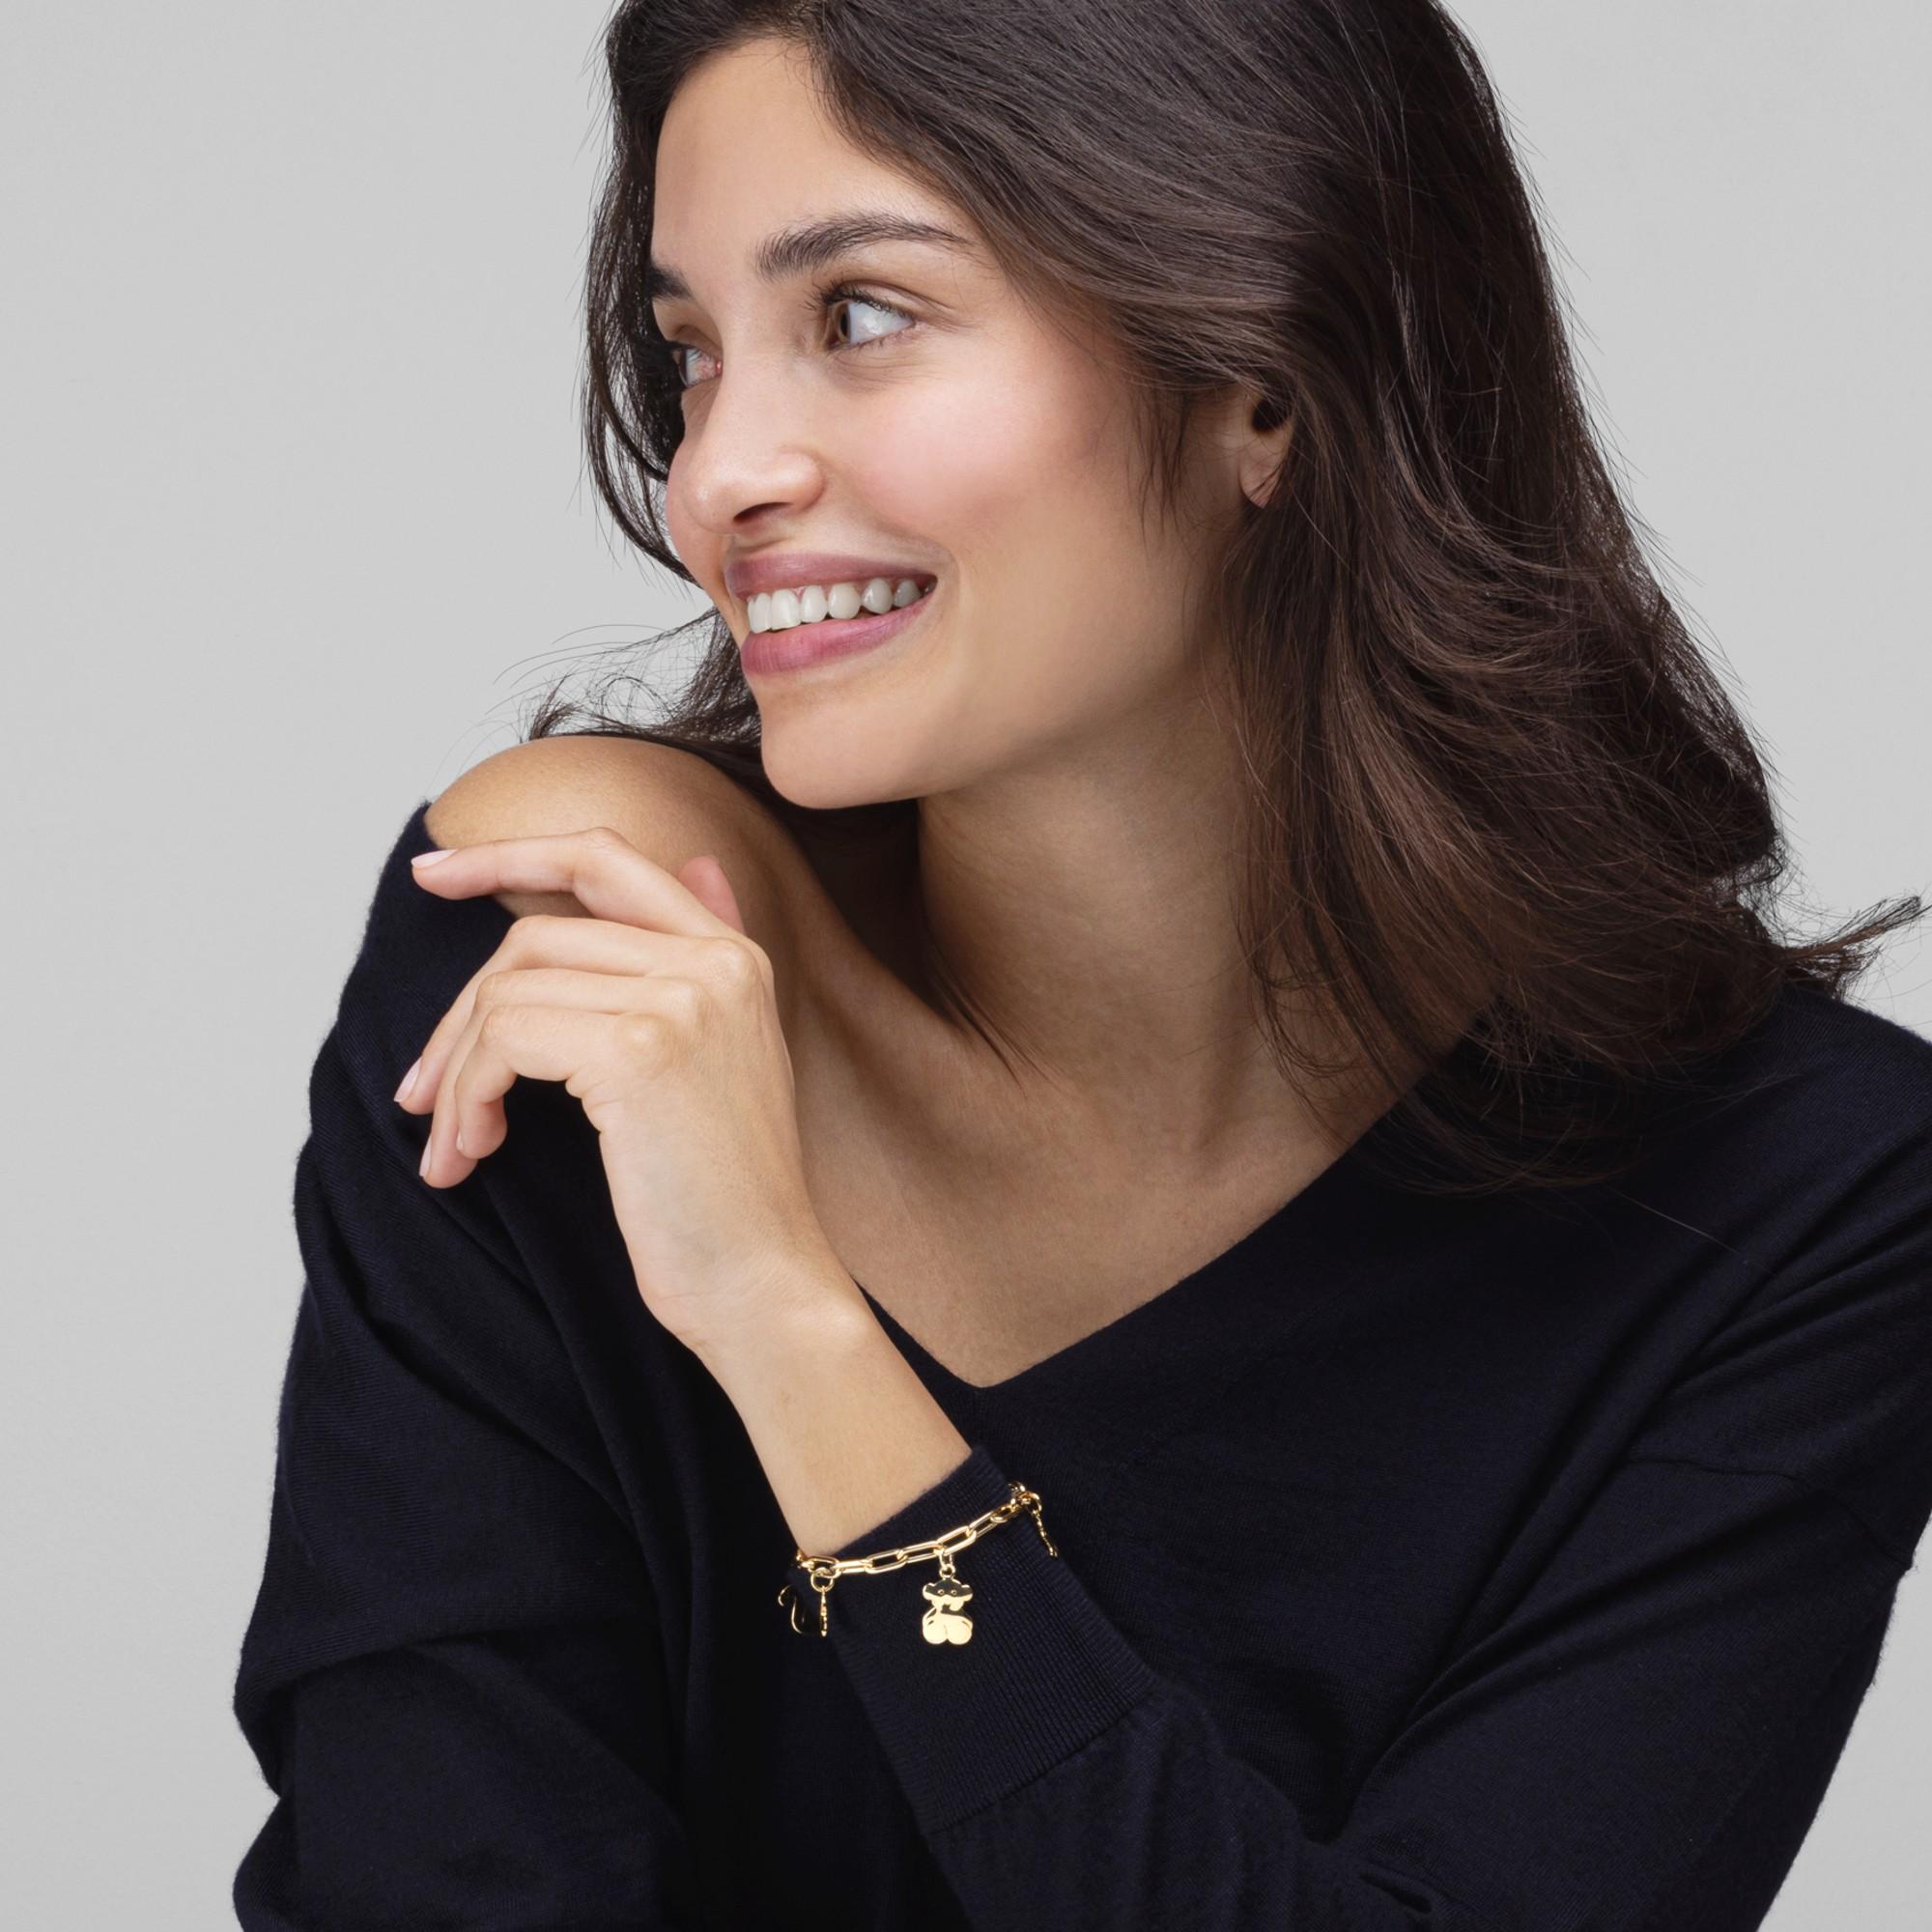 Alex Jona design collection, hand crafted in Italy, 18 karat yellow gold animal charm chain bracelet.

Alex Jona jewels stand out, not only for their special design and for the excellent quality of the gemstones, but also for the careful attention